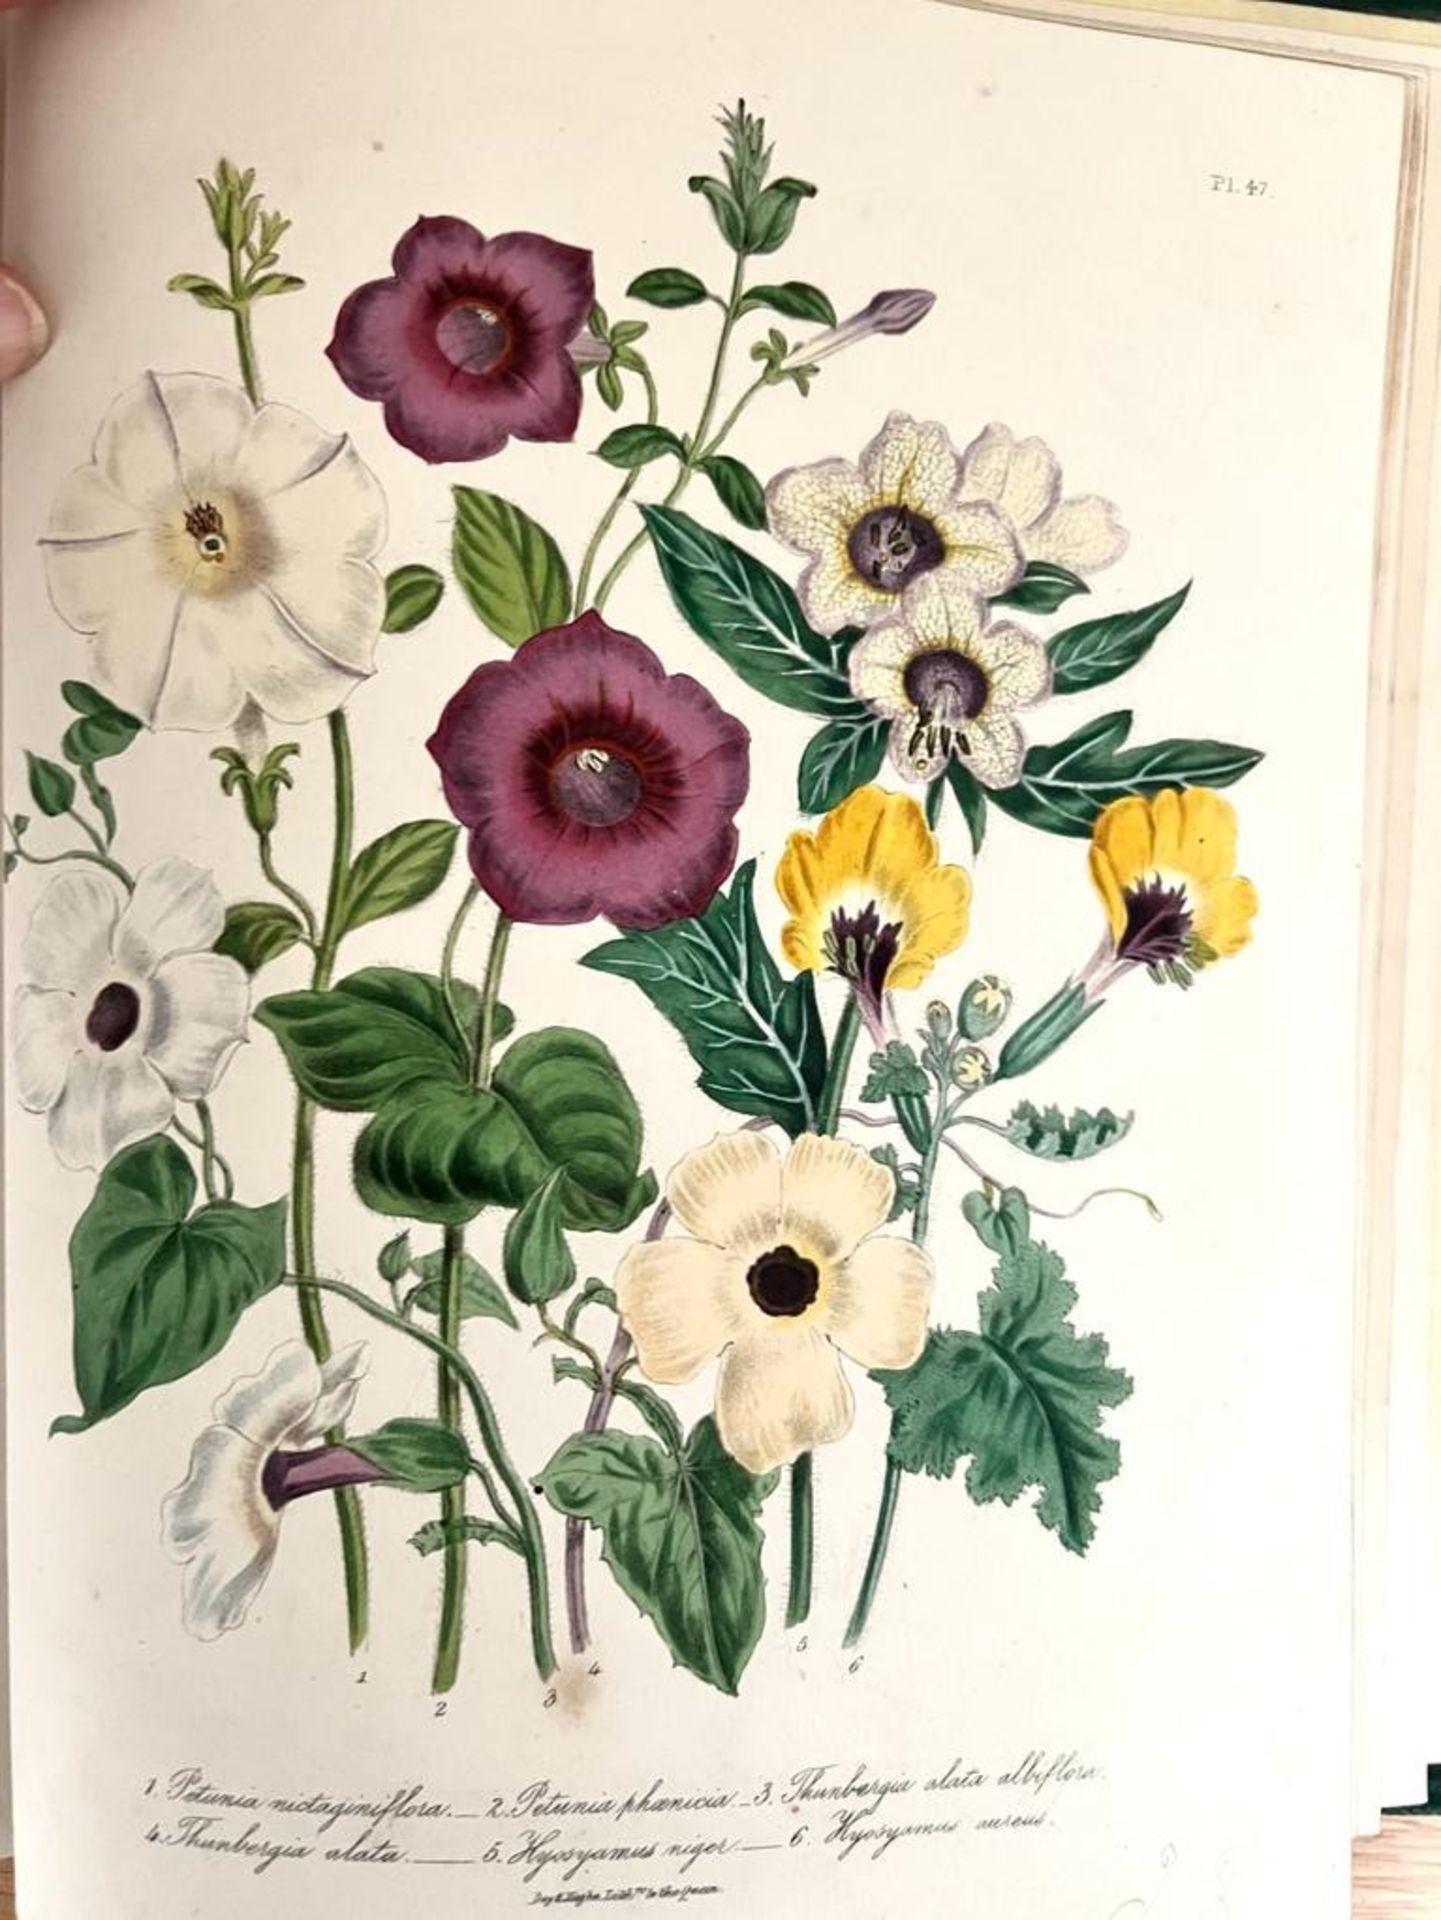 MRS JANE LOUDON, 'THE LADIES FLOWER GARDEN OF ORNAMENTAL ANNUALS', 1840 - Image 5 of 8